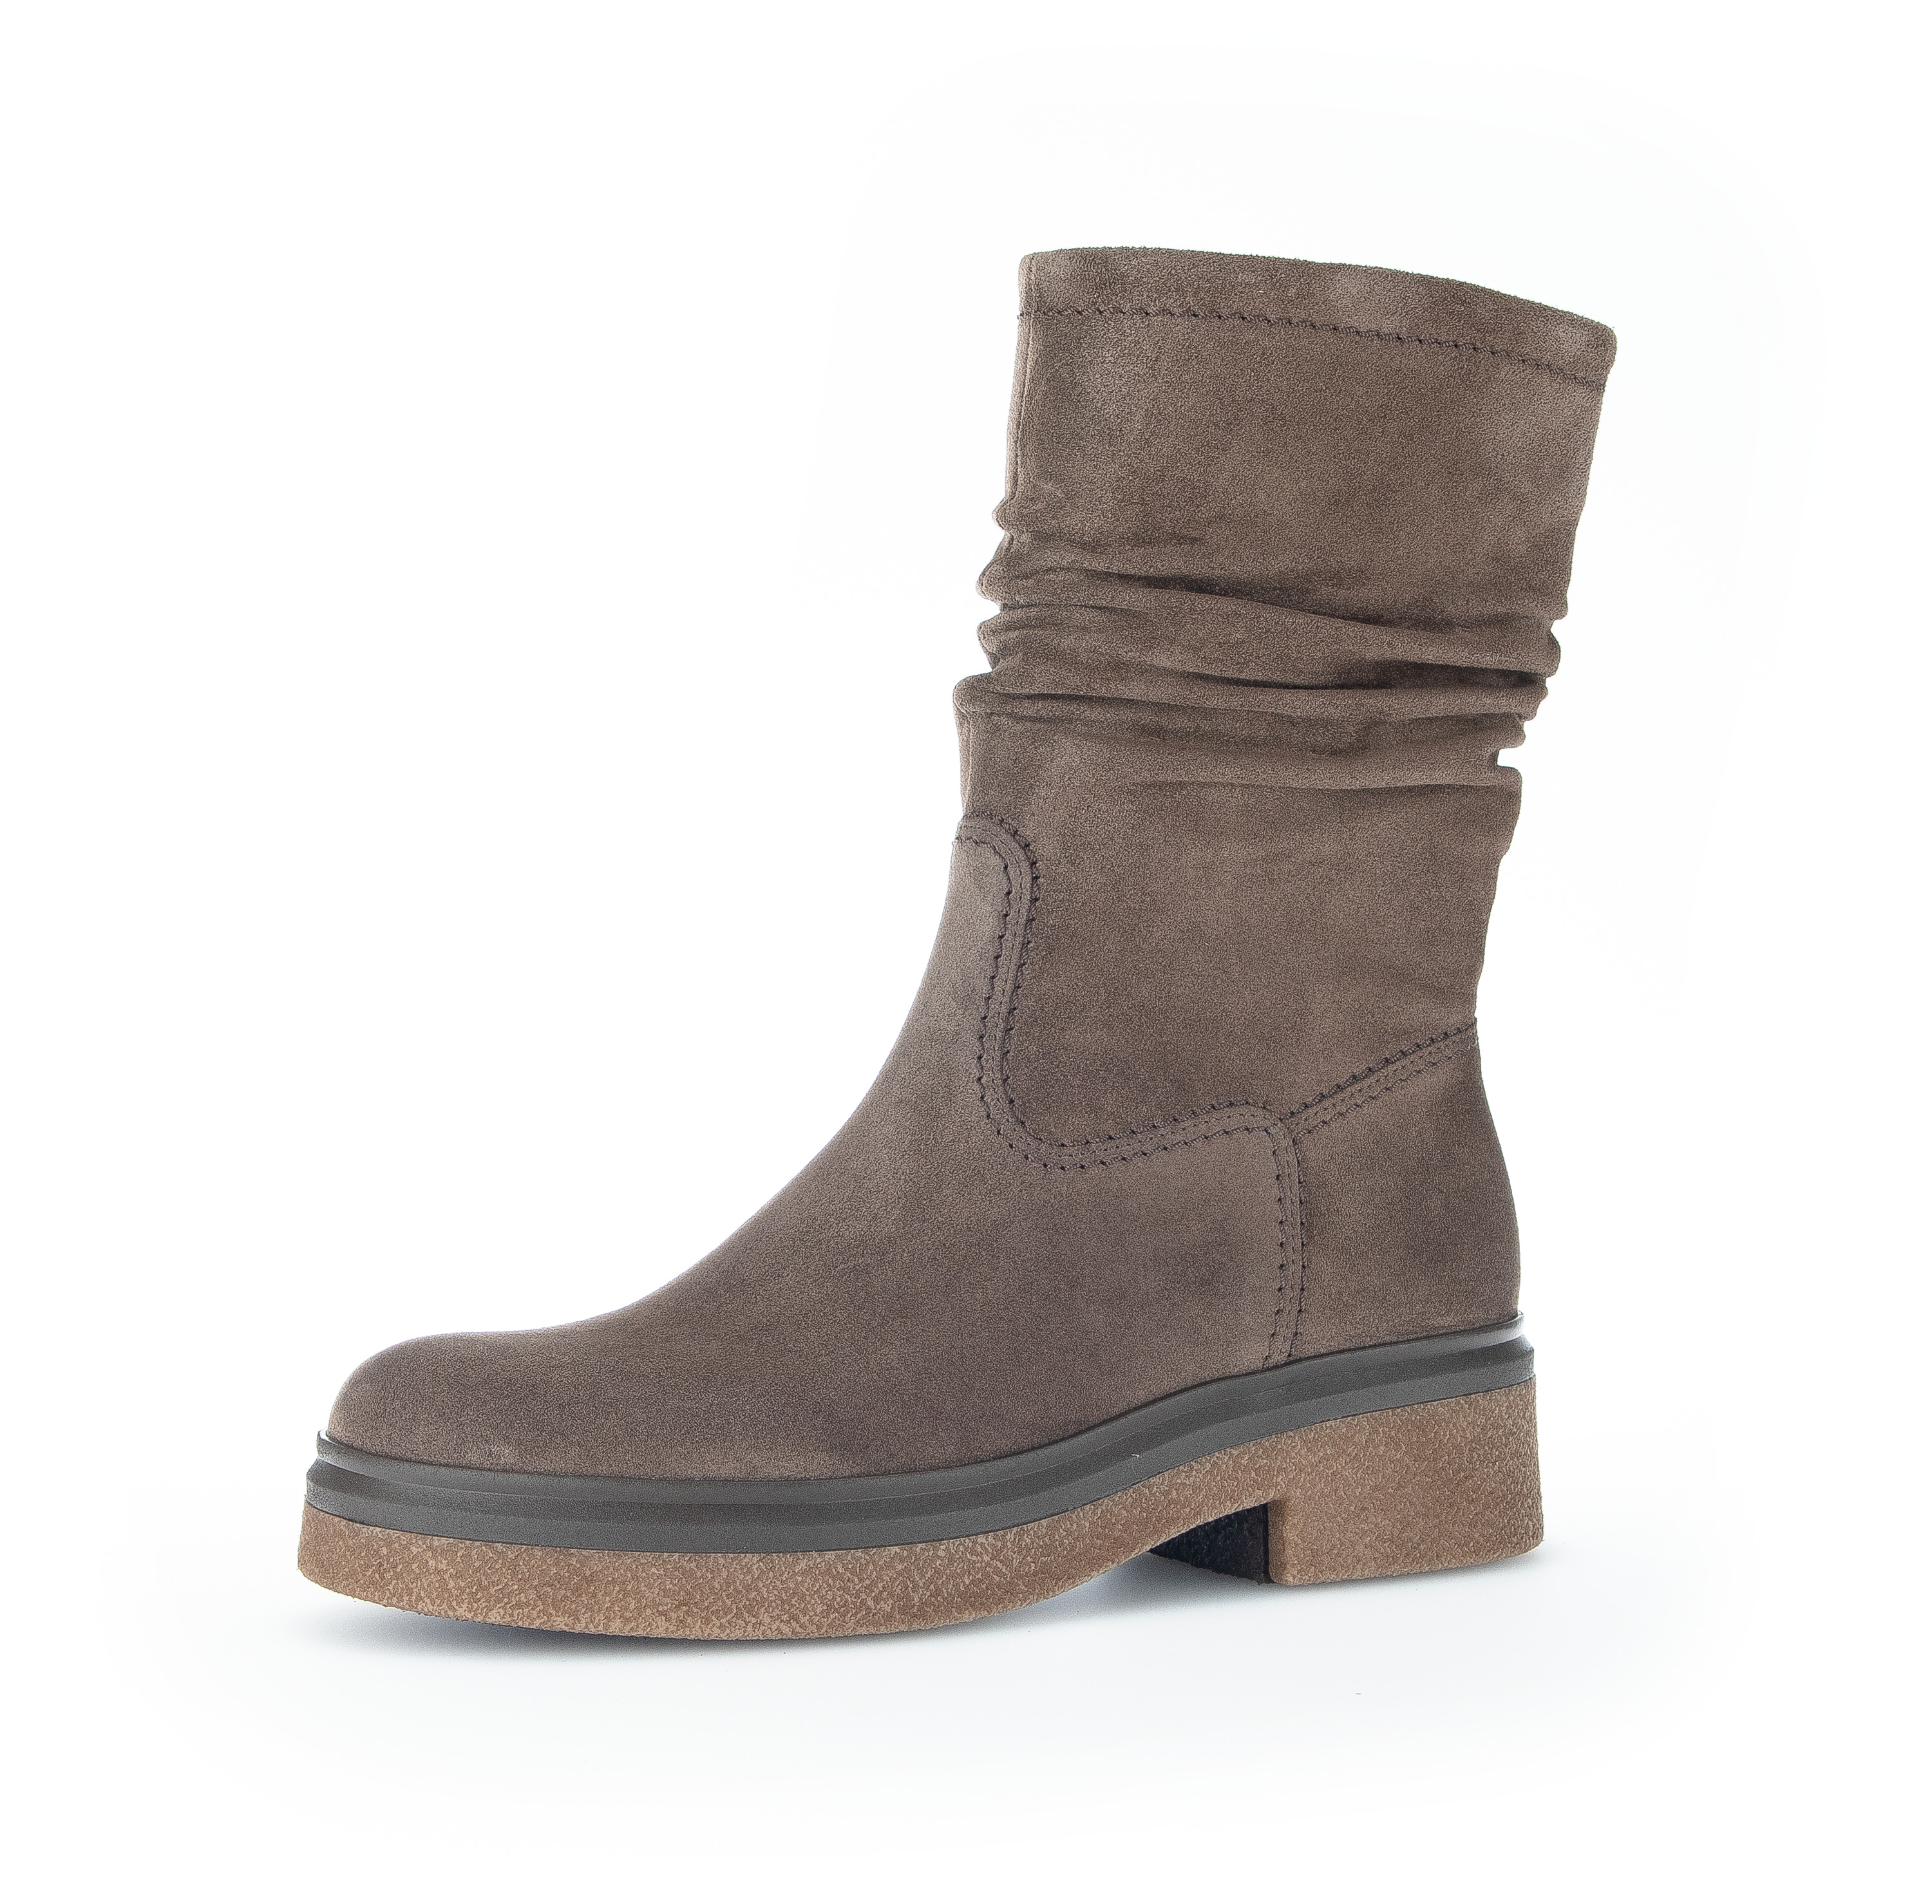 Gabor Comfort Boot - Brown Leather